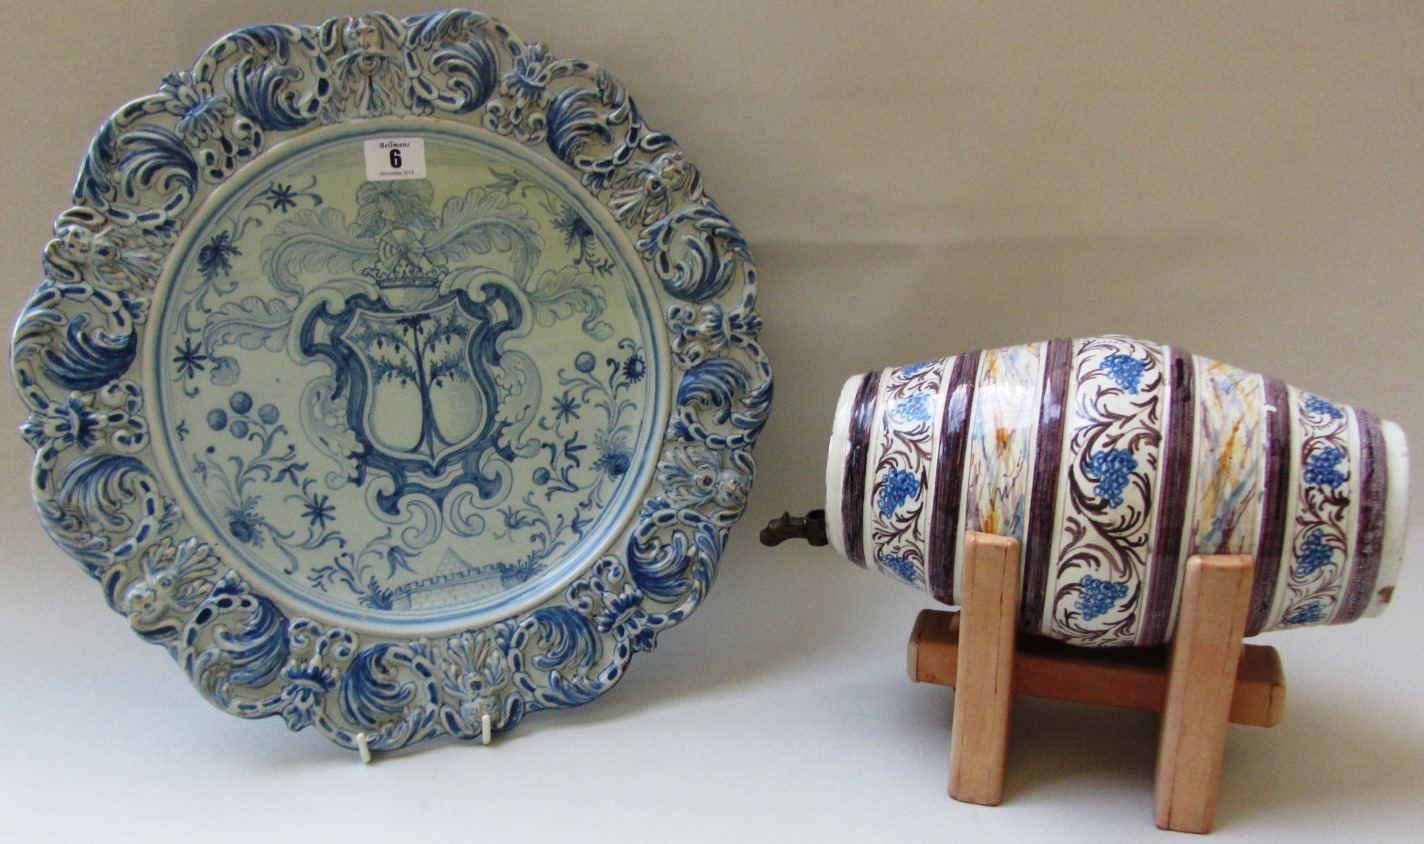 A Pavia armorial charger and an Italian maiolica spirit barrel, circa 1720, the second possibly